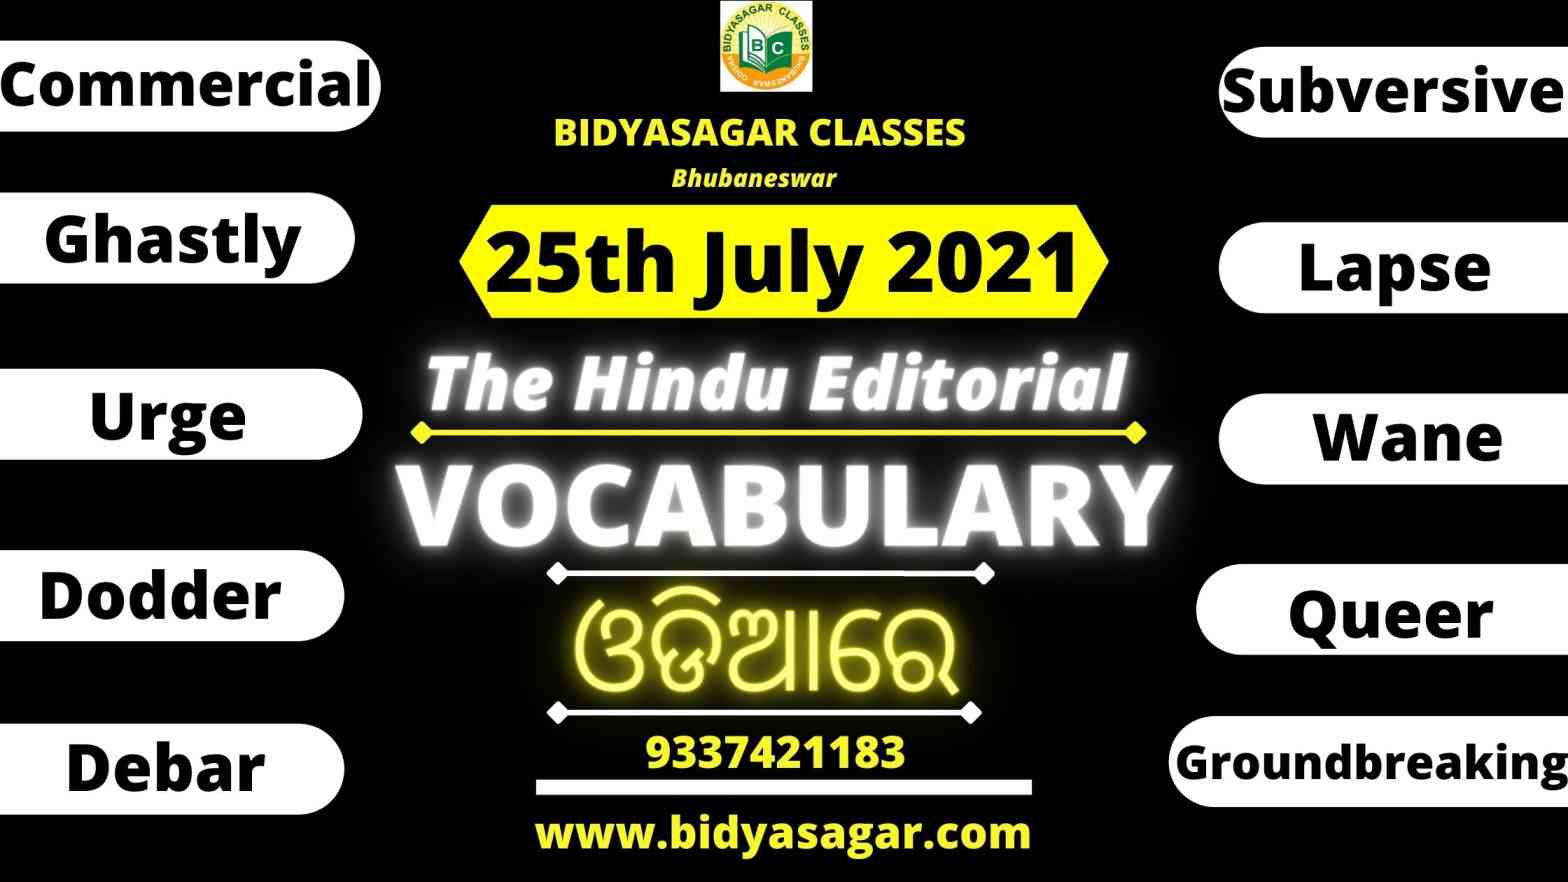 The Hindu Editorial Vocabulary of 25th July 2021